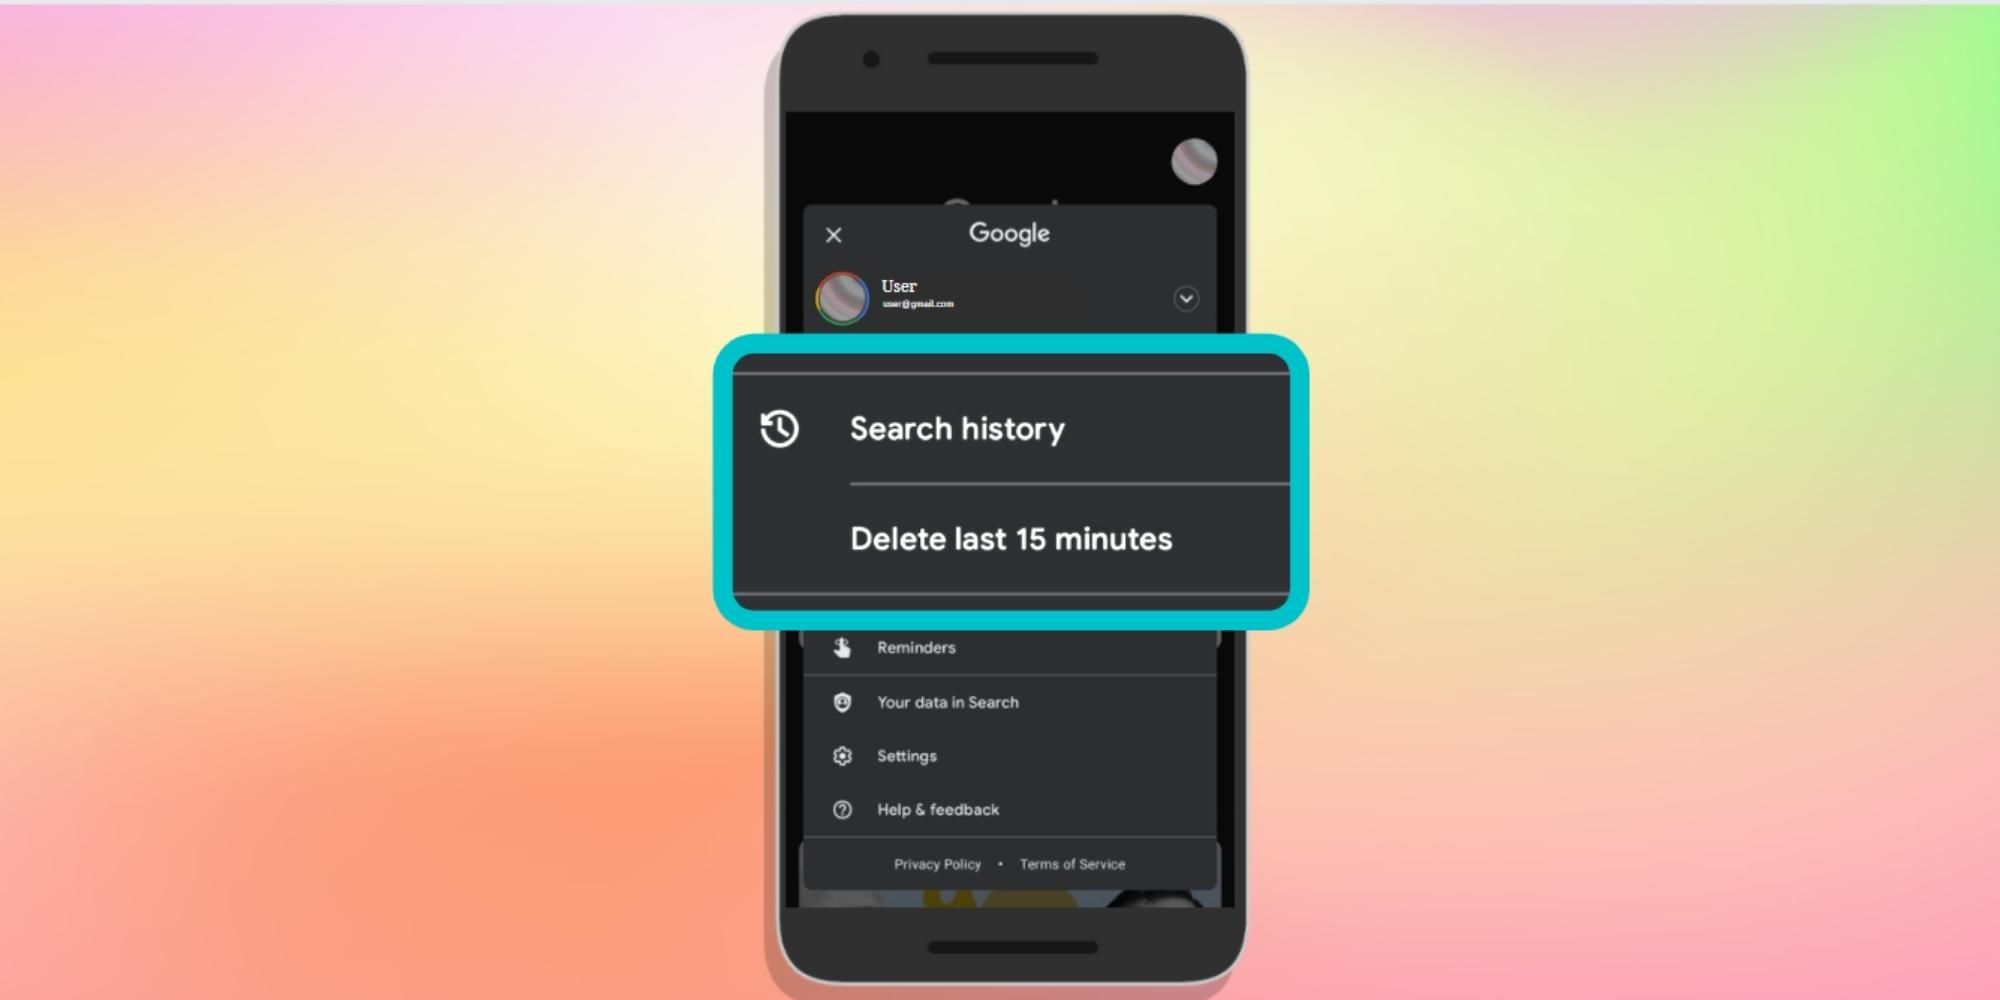 Google Releases Delete Last 15 Minutes For Android